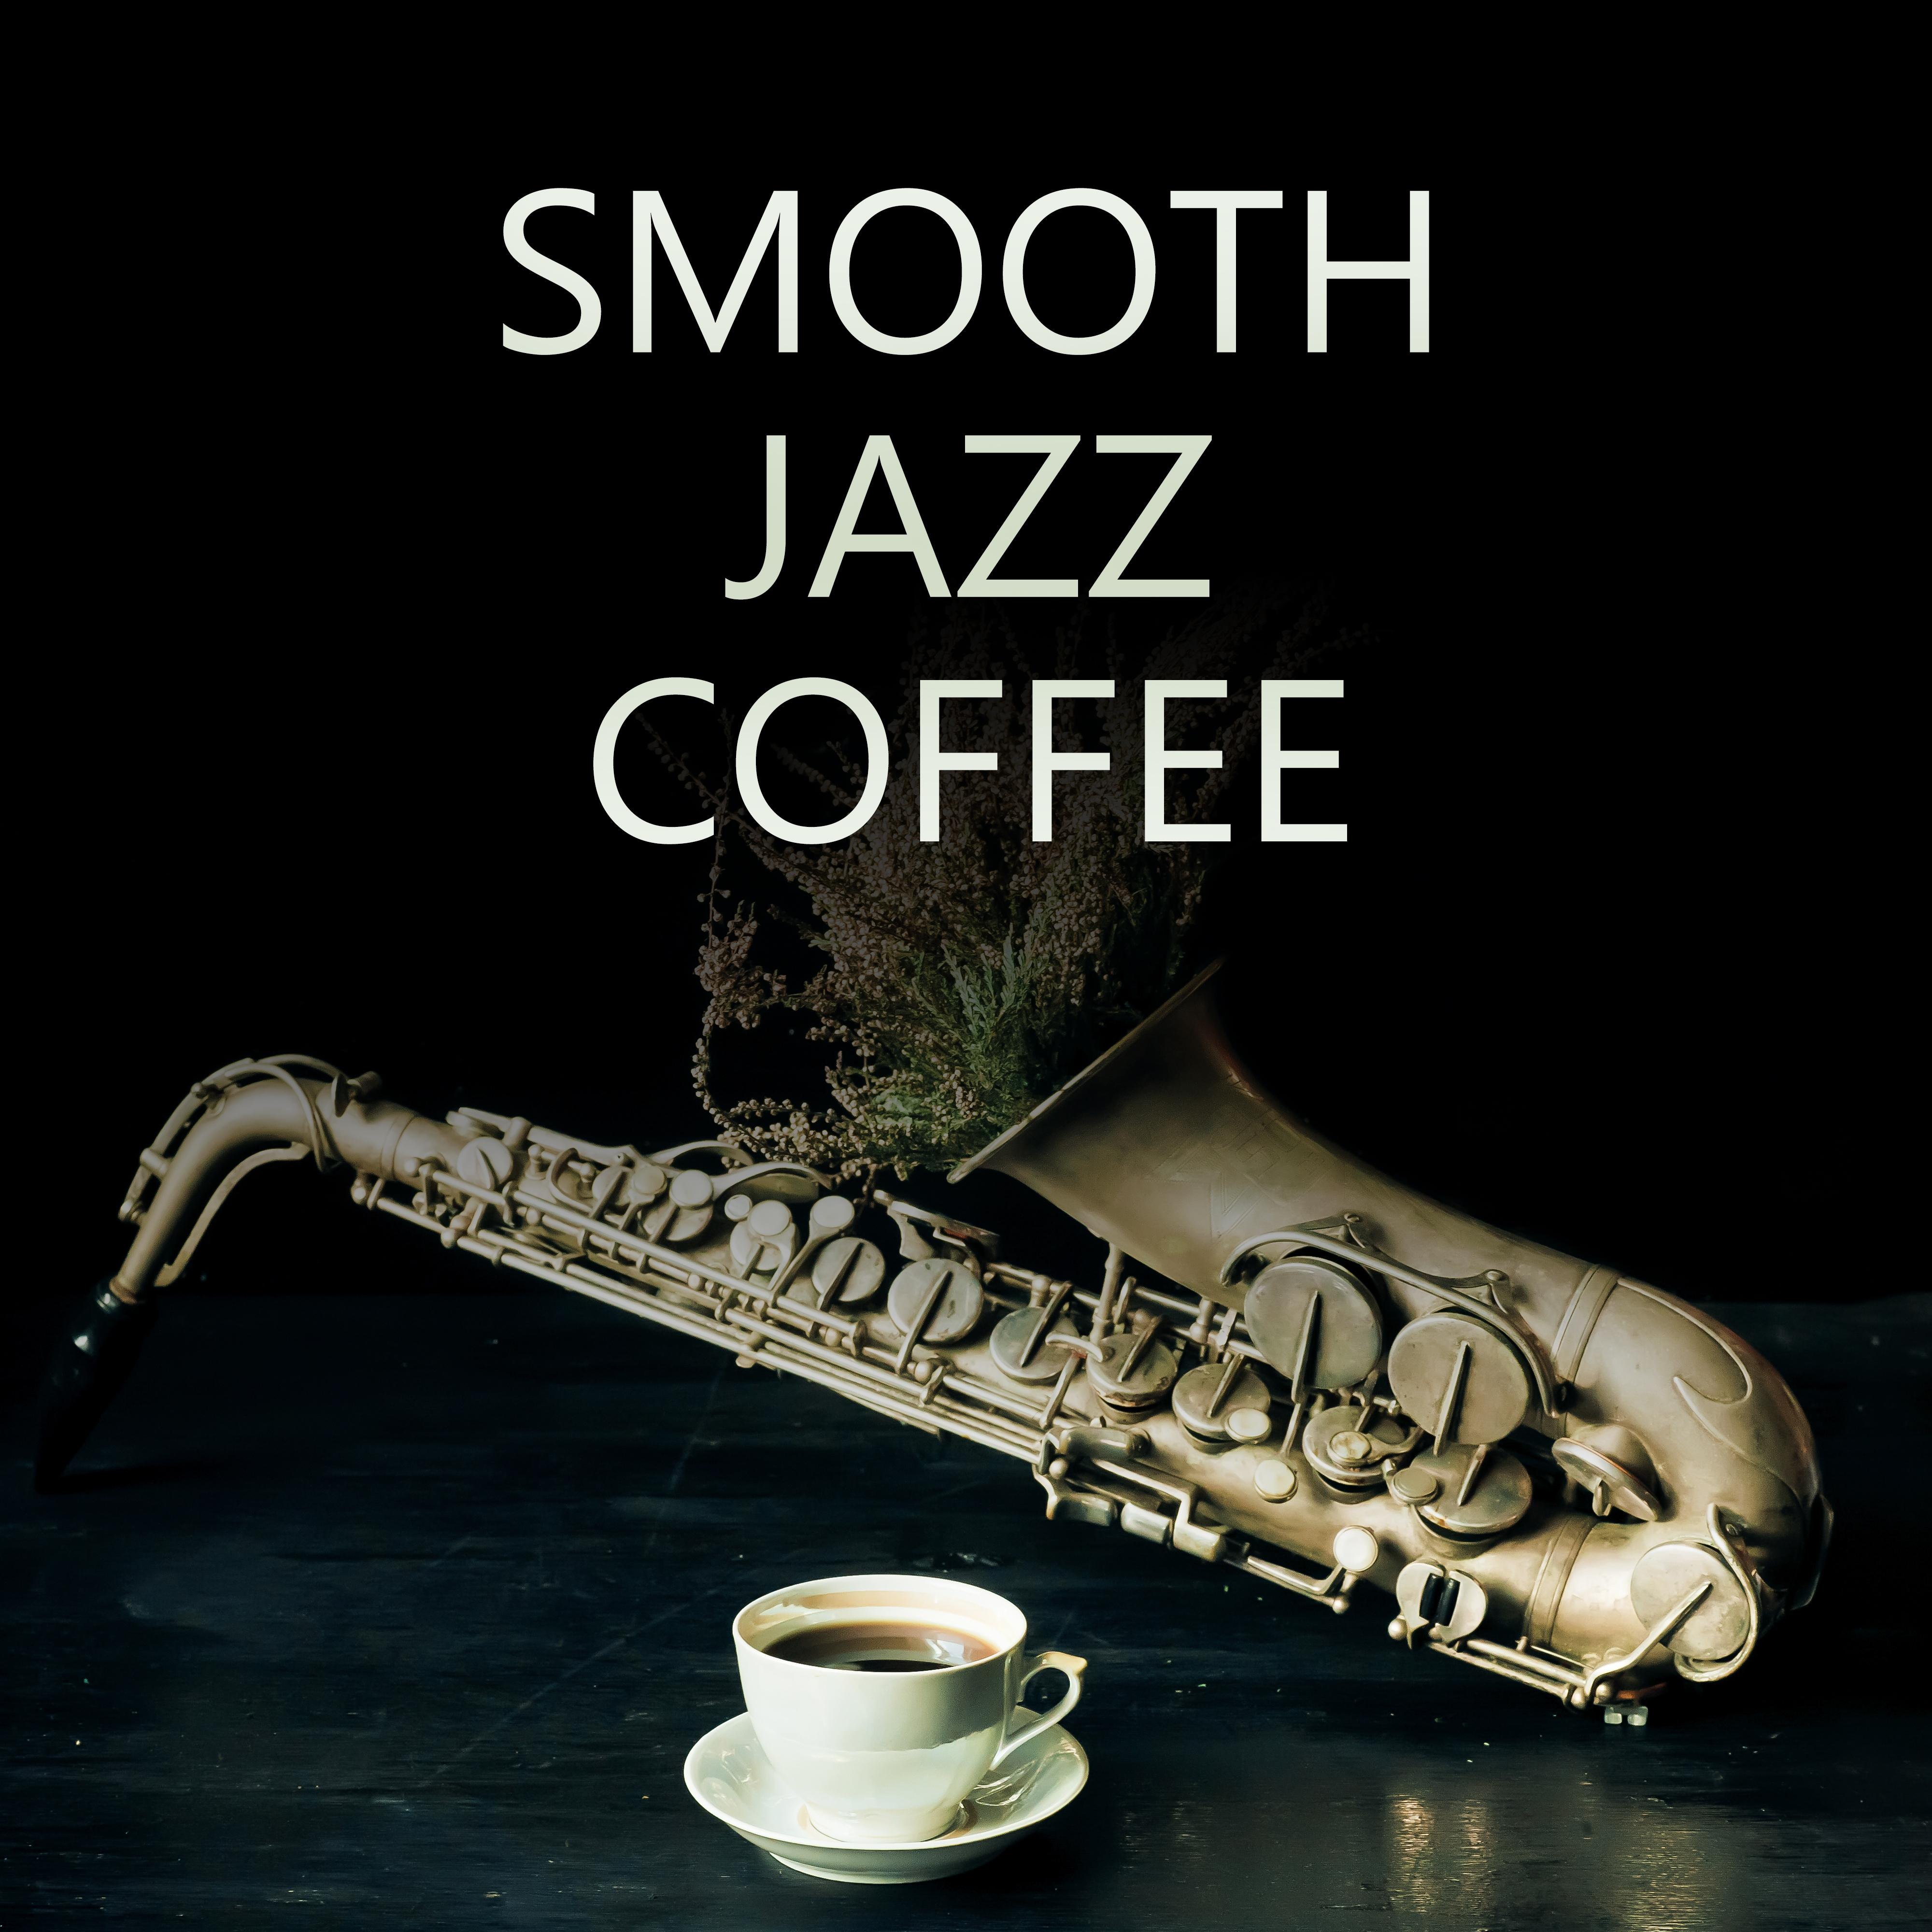 Smooth Jazz Coffee – Instrumental Songs for Relaxation, Restaurant, Cafe, Mellow Jazz 2019, Relax Zone